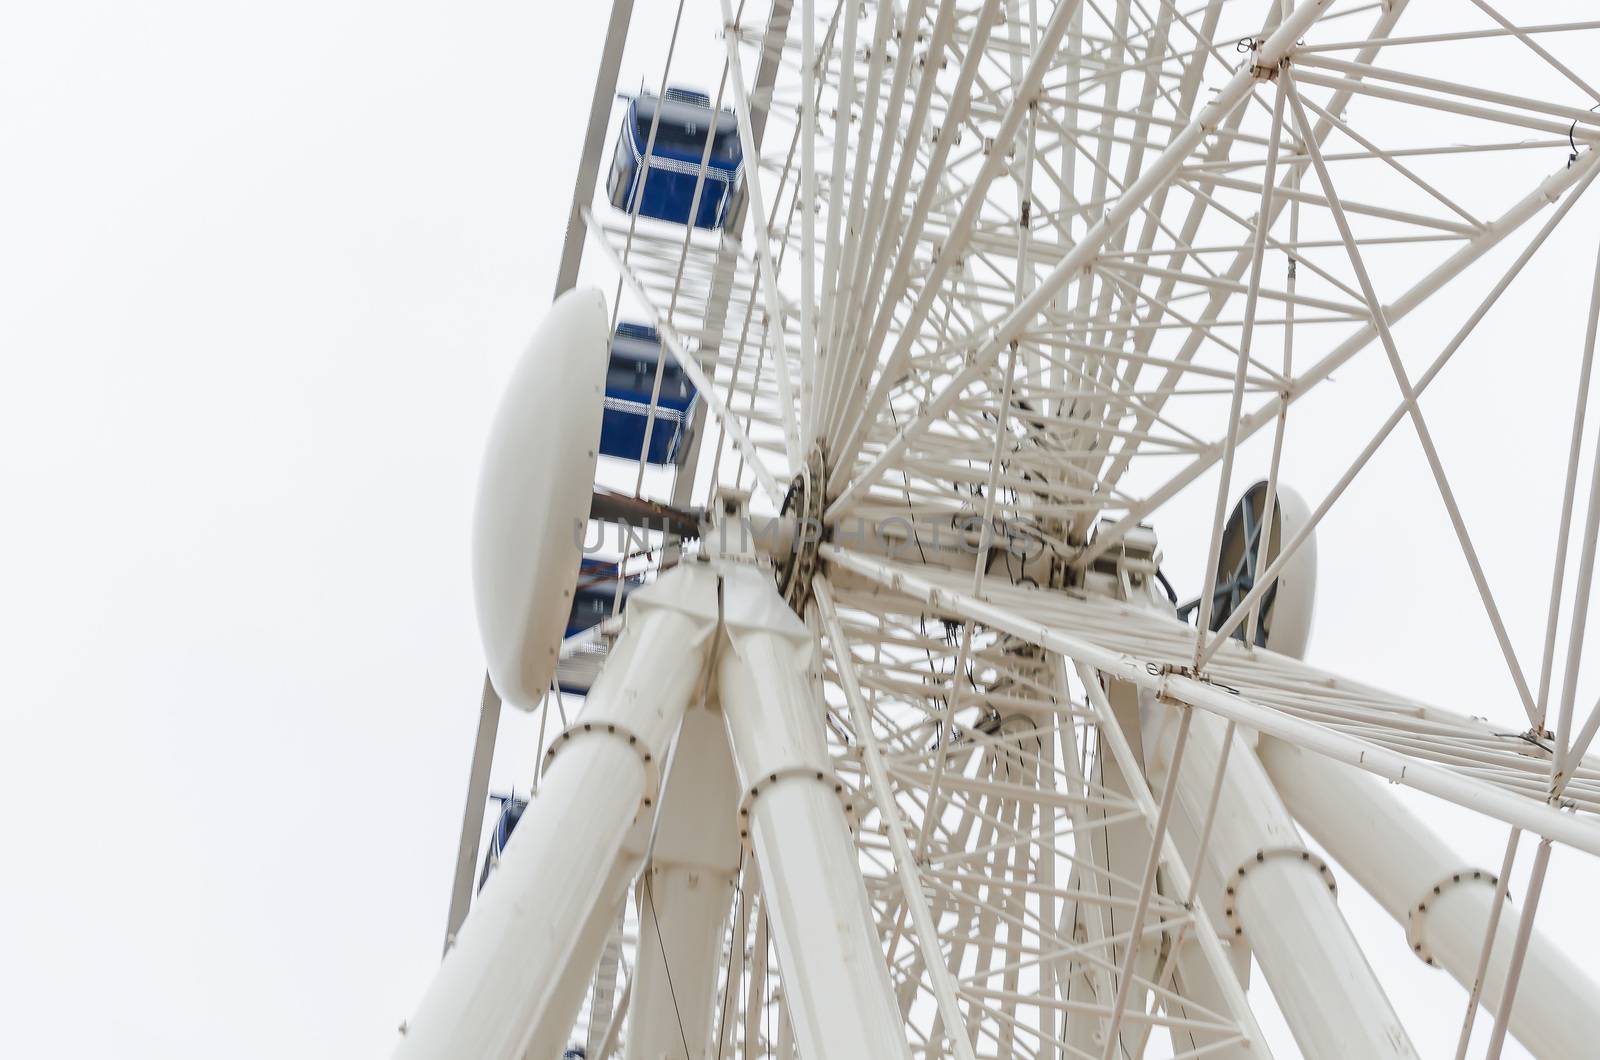 View from below of the construction of a ferris wheel.